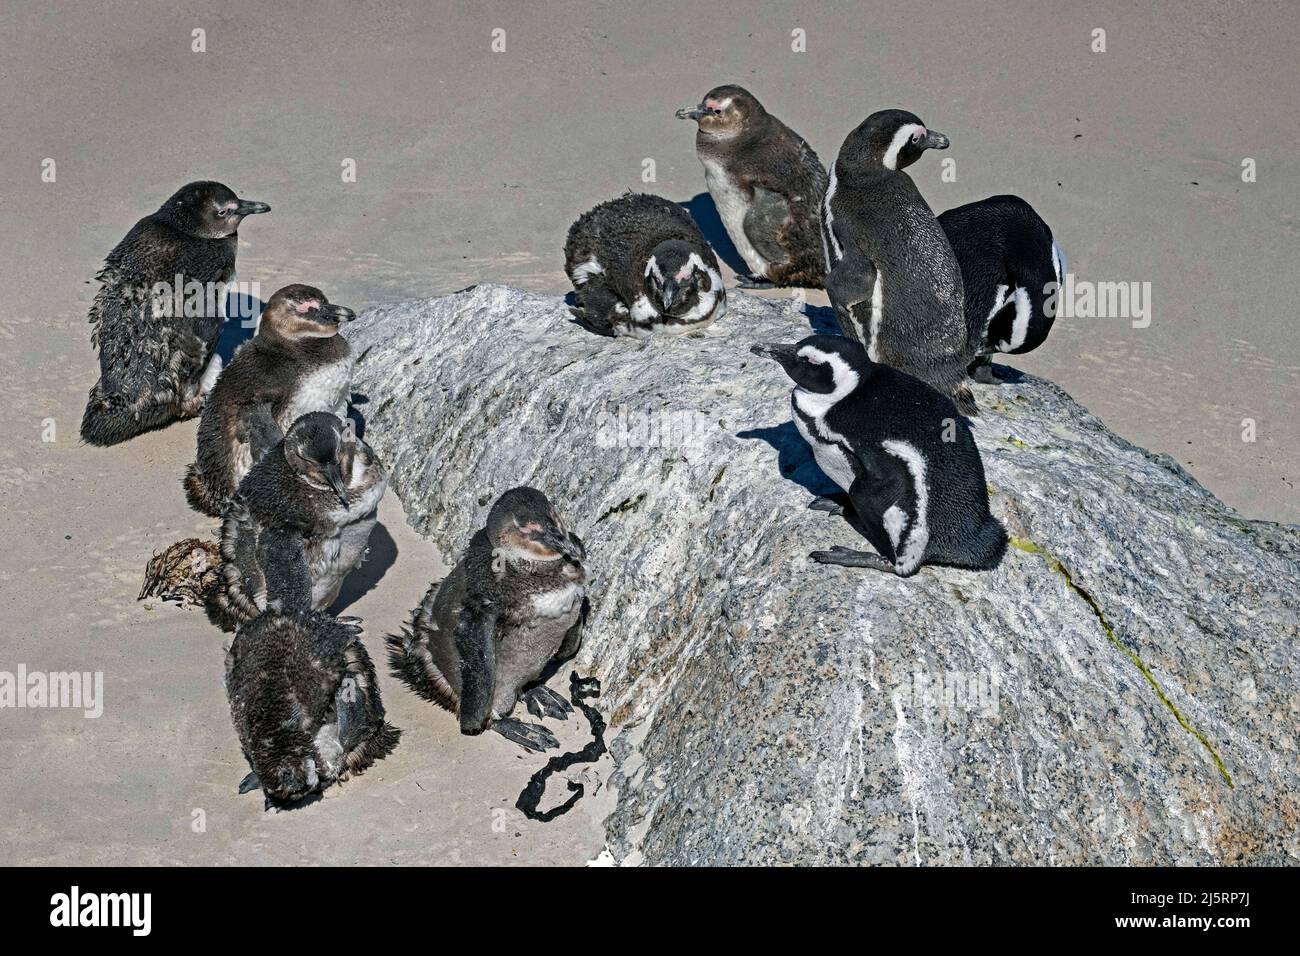 Cape penguins / South African penguin (Spheniscus demersus), adults and moulting juveniles at Boulders Beach, Simon's Town, Western Cape, South Africa Stock Photo